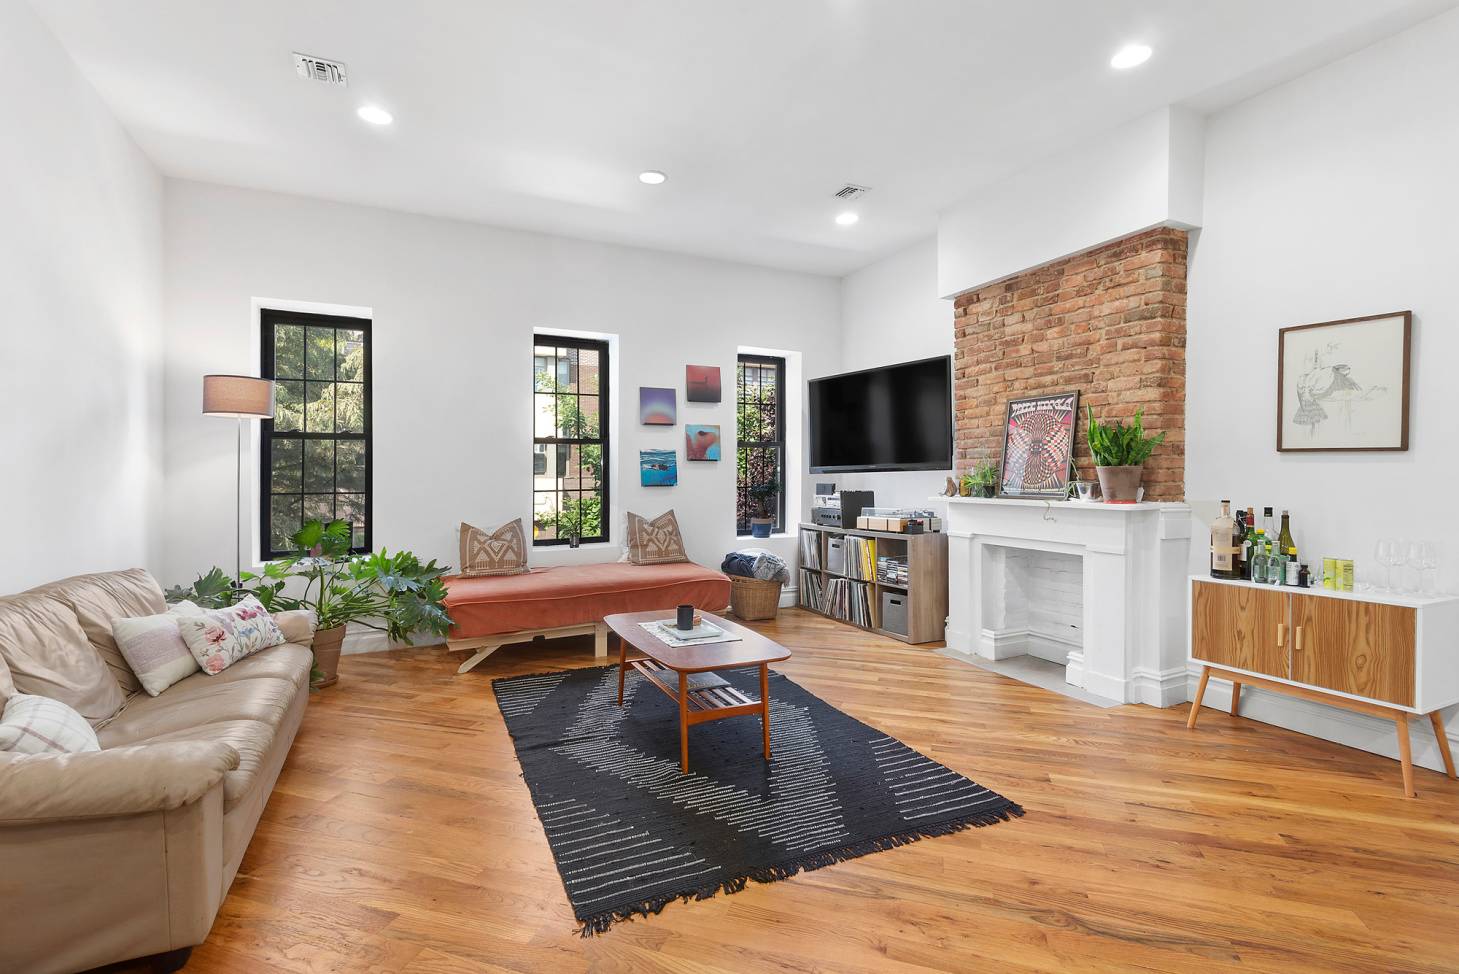 RARE GEM OF A TOWNHOUSE W 2 UNITS IN PRIME BUSHWICK Fully renovated 2 family townhouse in the heart of Bushwick with amazing cap rate !